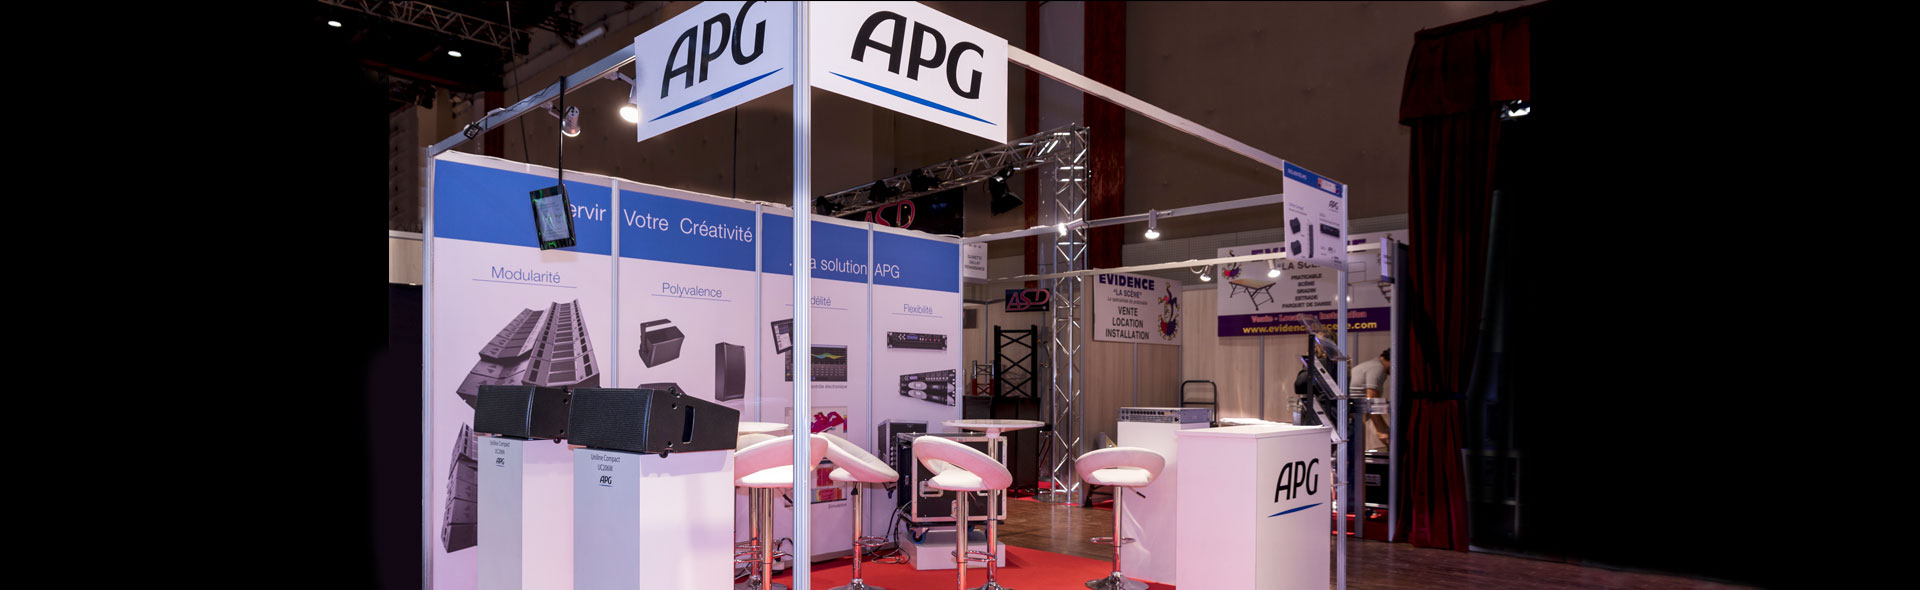 APG Previews New Line Arrays at the 2015 JTSE in Paris